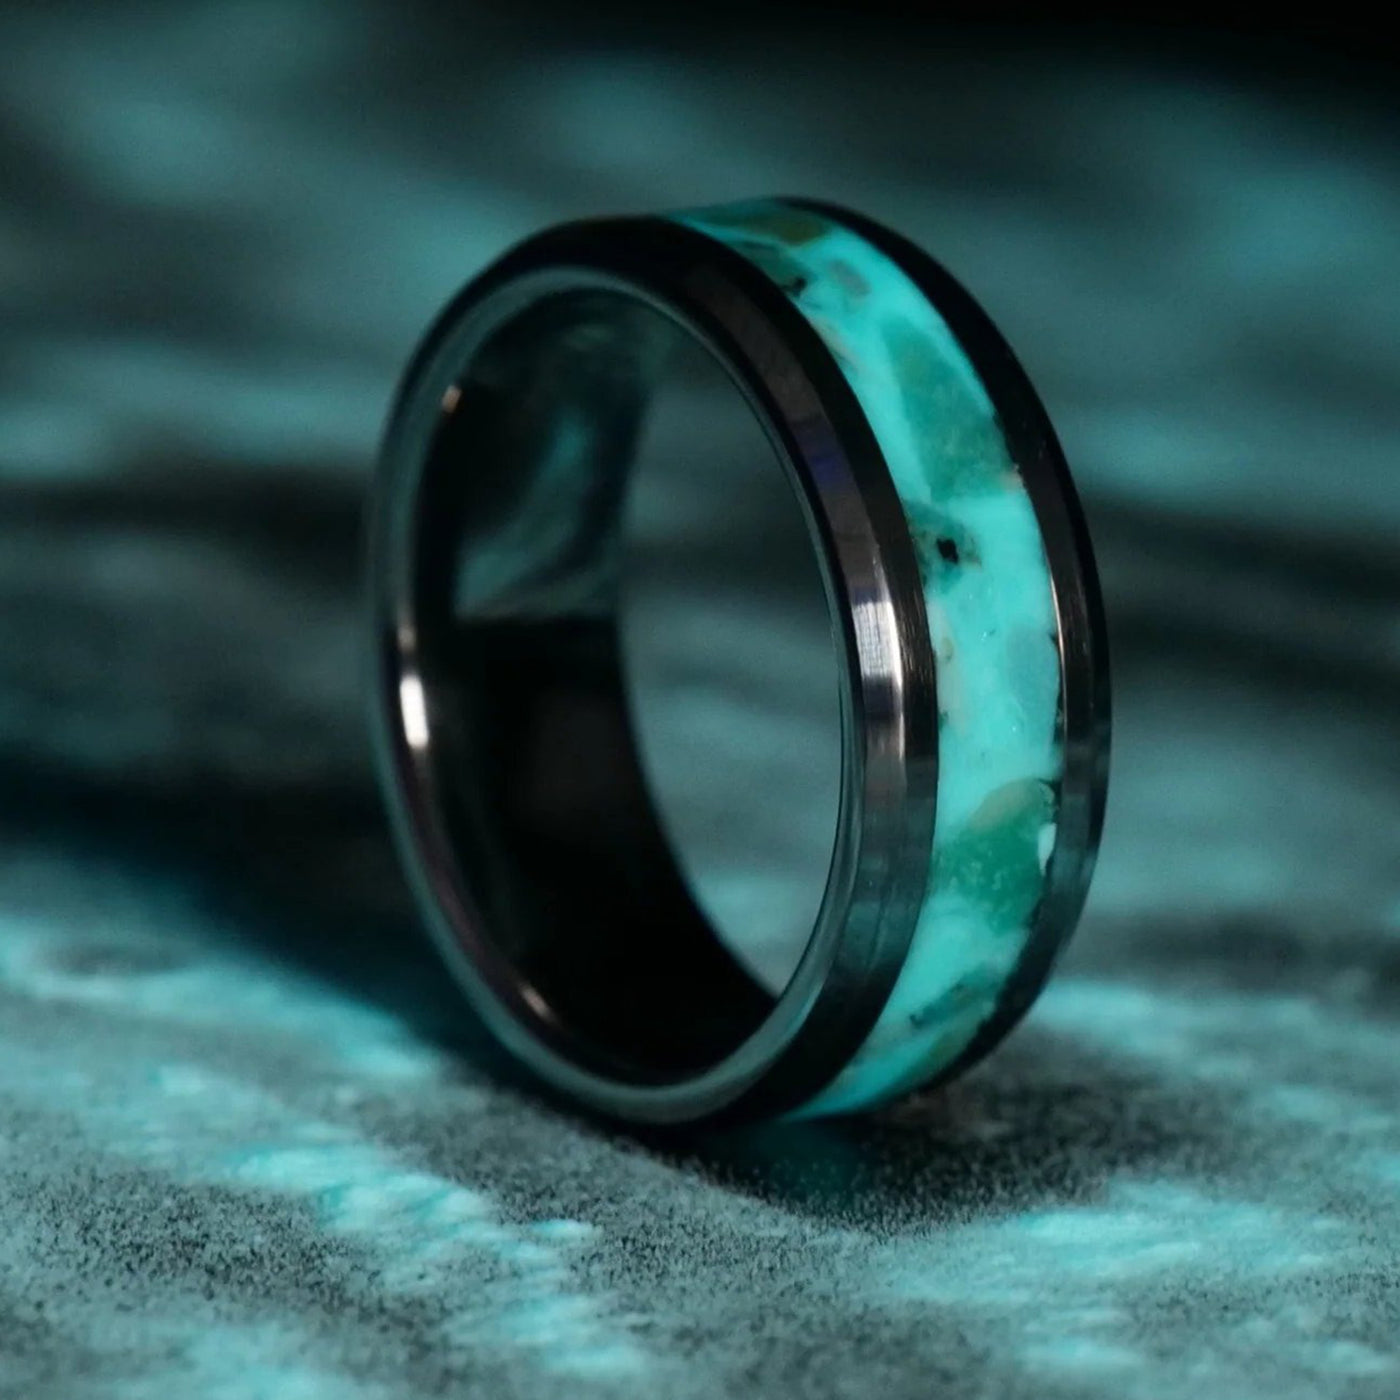 The Trident Ring | Turquoise Glowstone Ring - Patrick Adair Designs